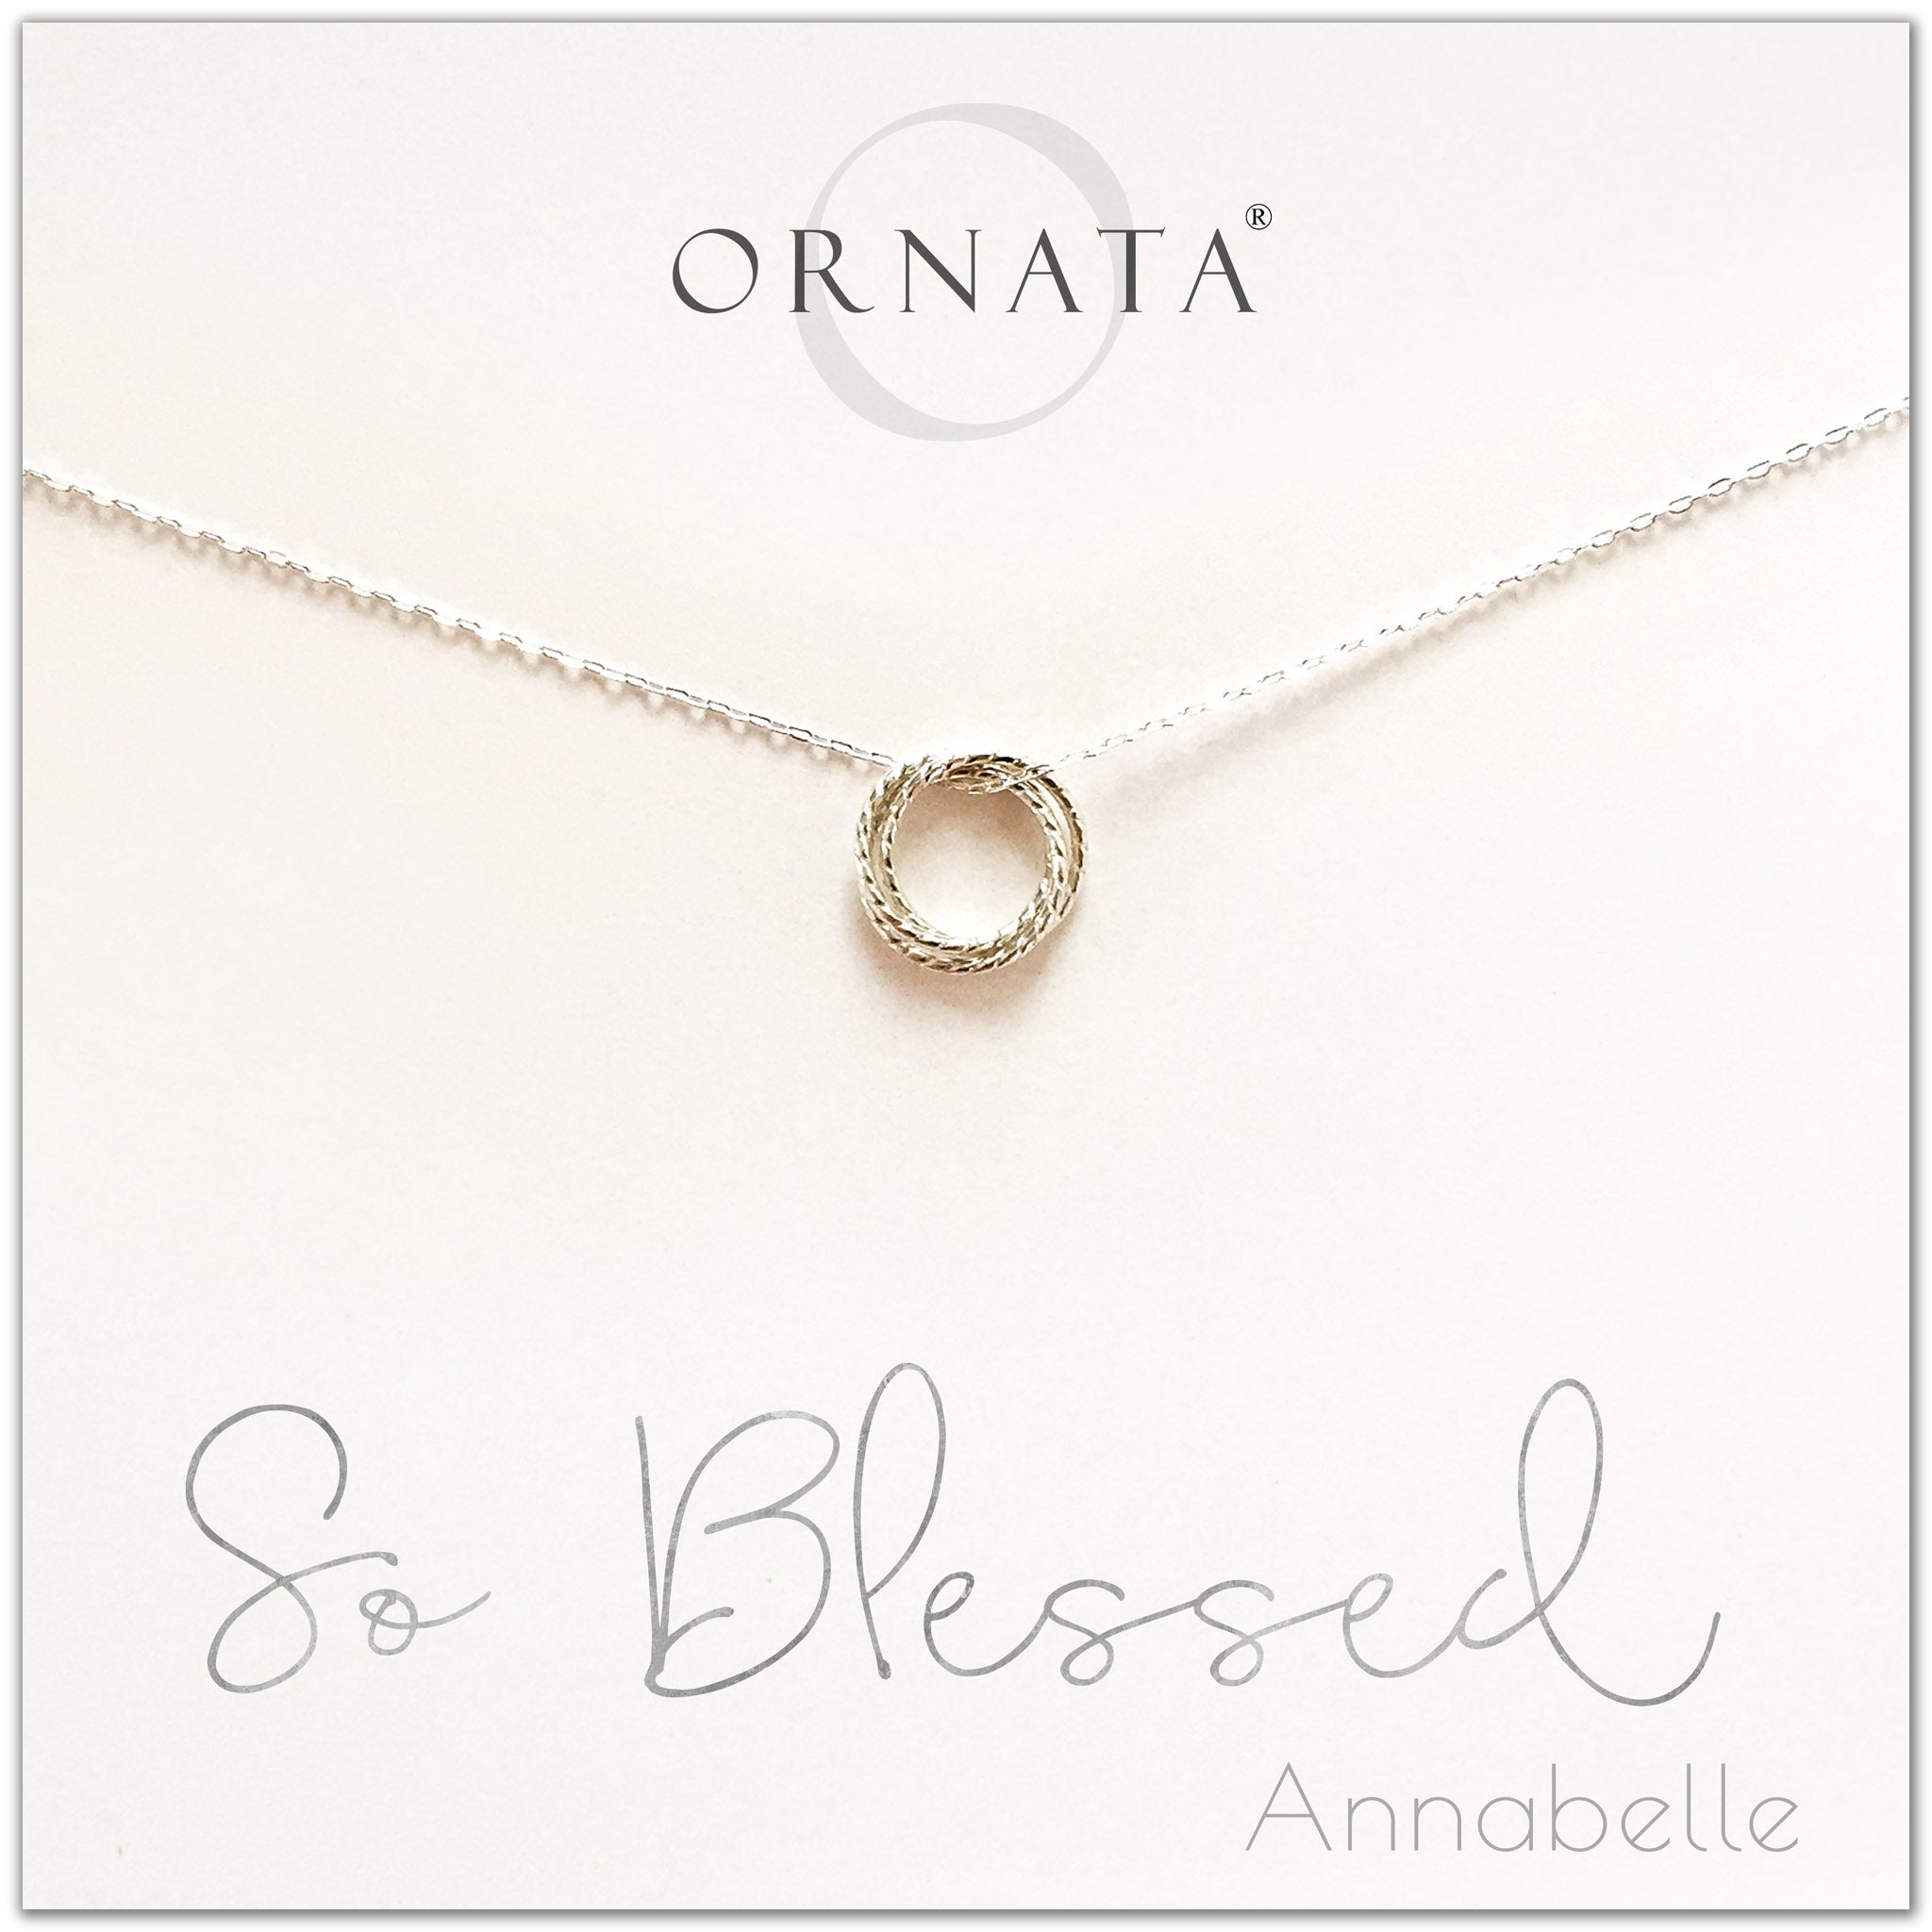 Personalized silver blessed necklace. Our sterling silver custom jewelry is a perfect gift for friends, sisters, mothers, or family members - symbolic necklace with rings to represent love, family, and blessings. 